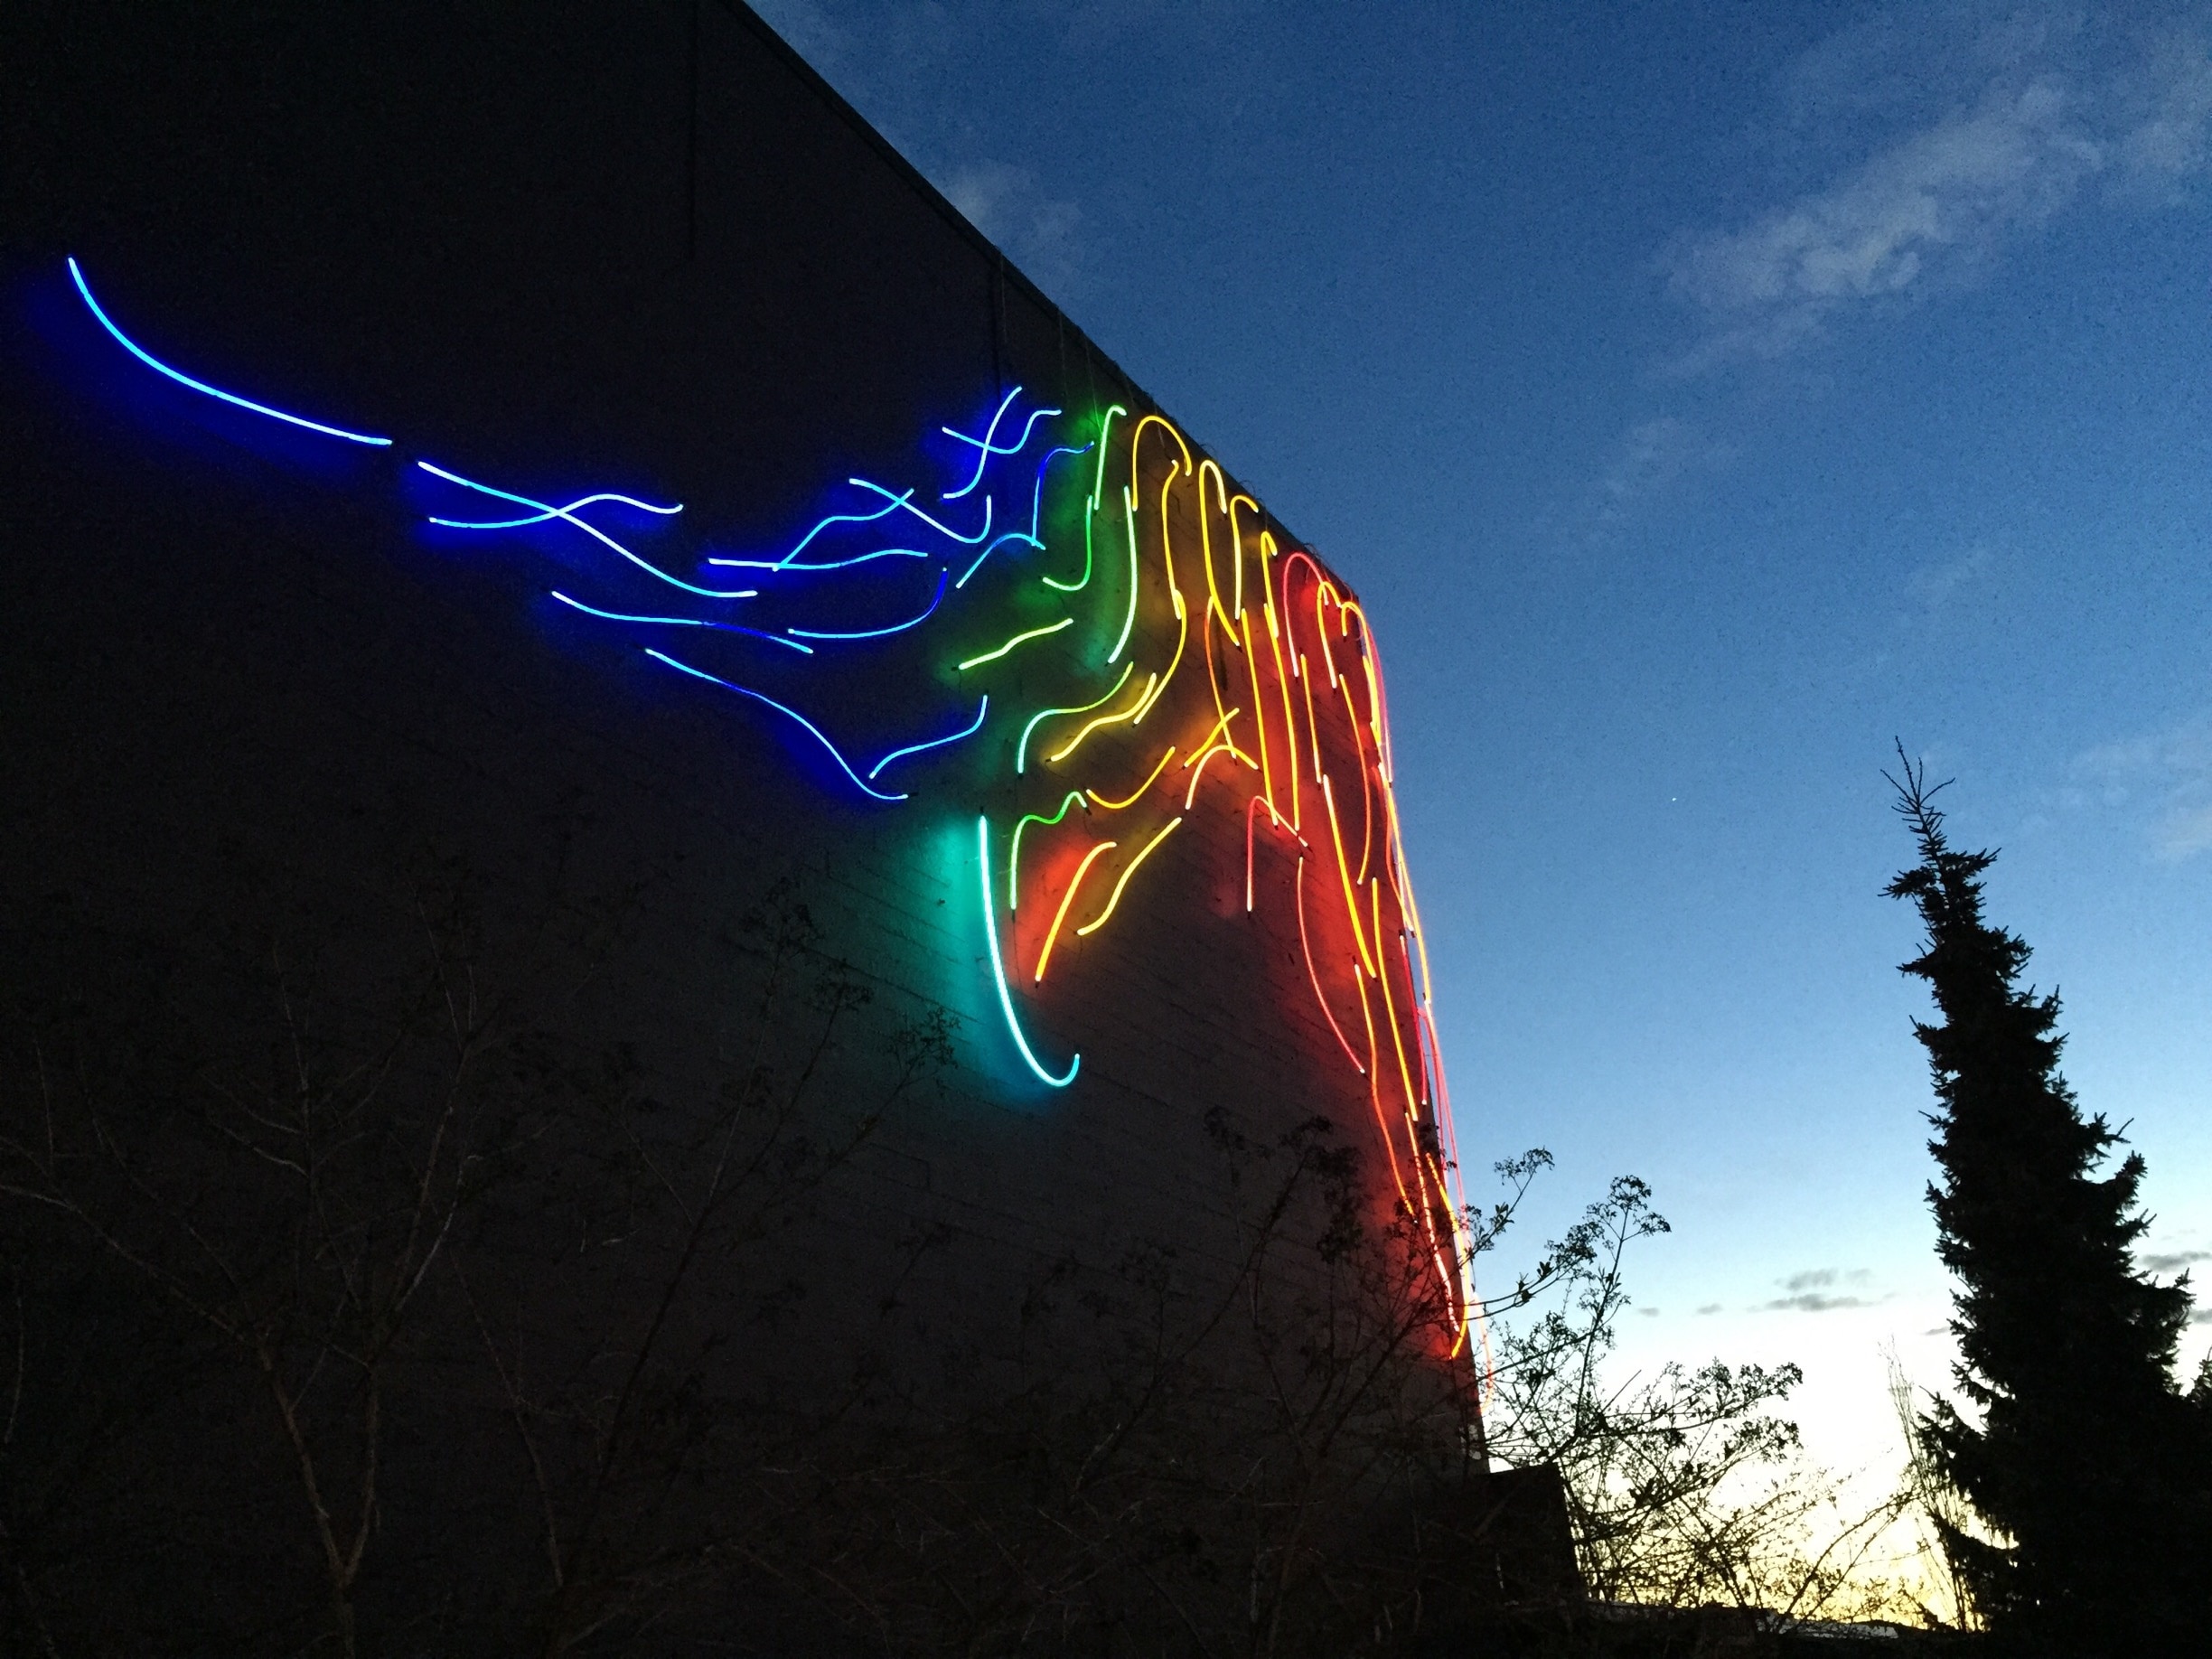 Neon art at sunset. There's also a very cool skatepark right beside the theater. 

#roadtrip